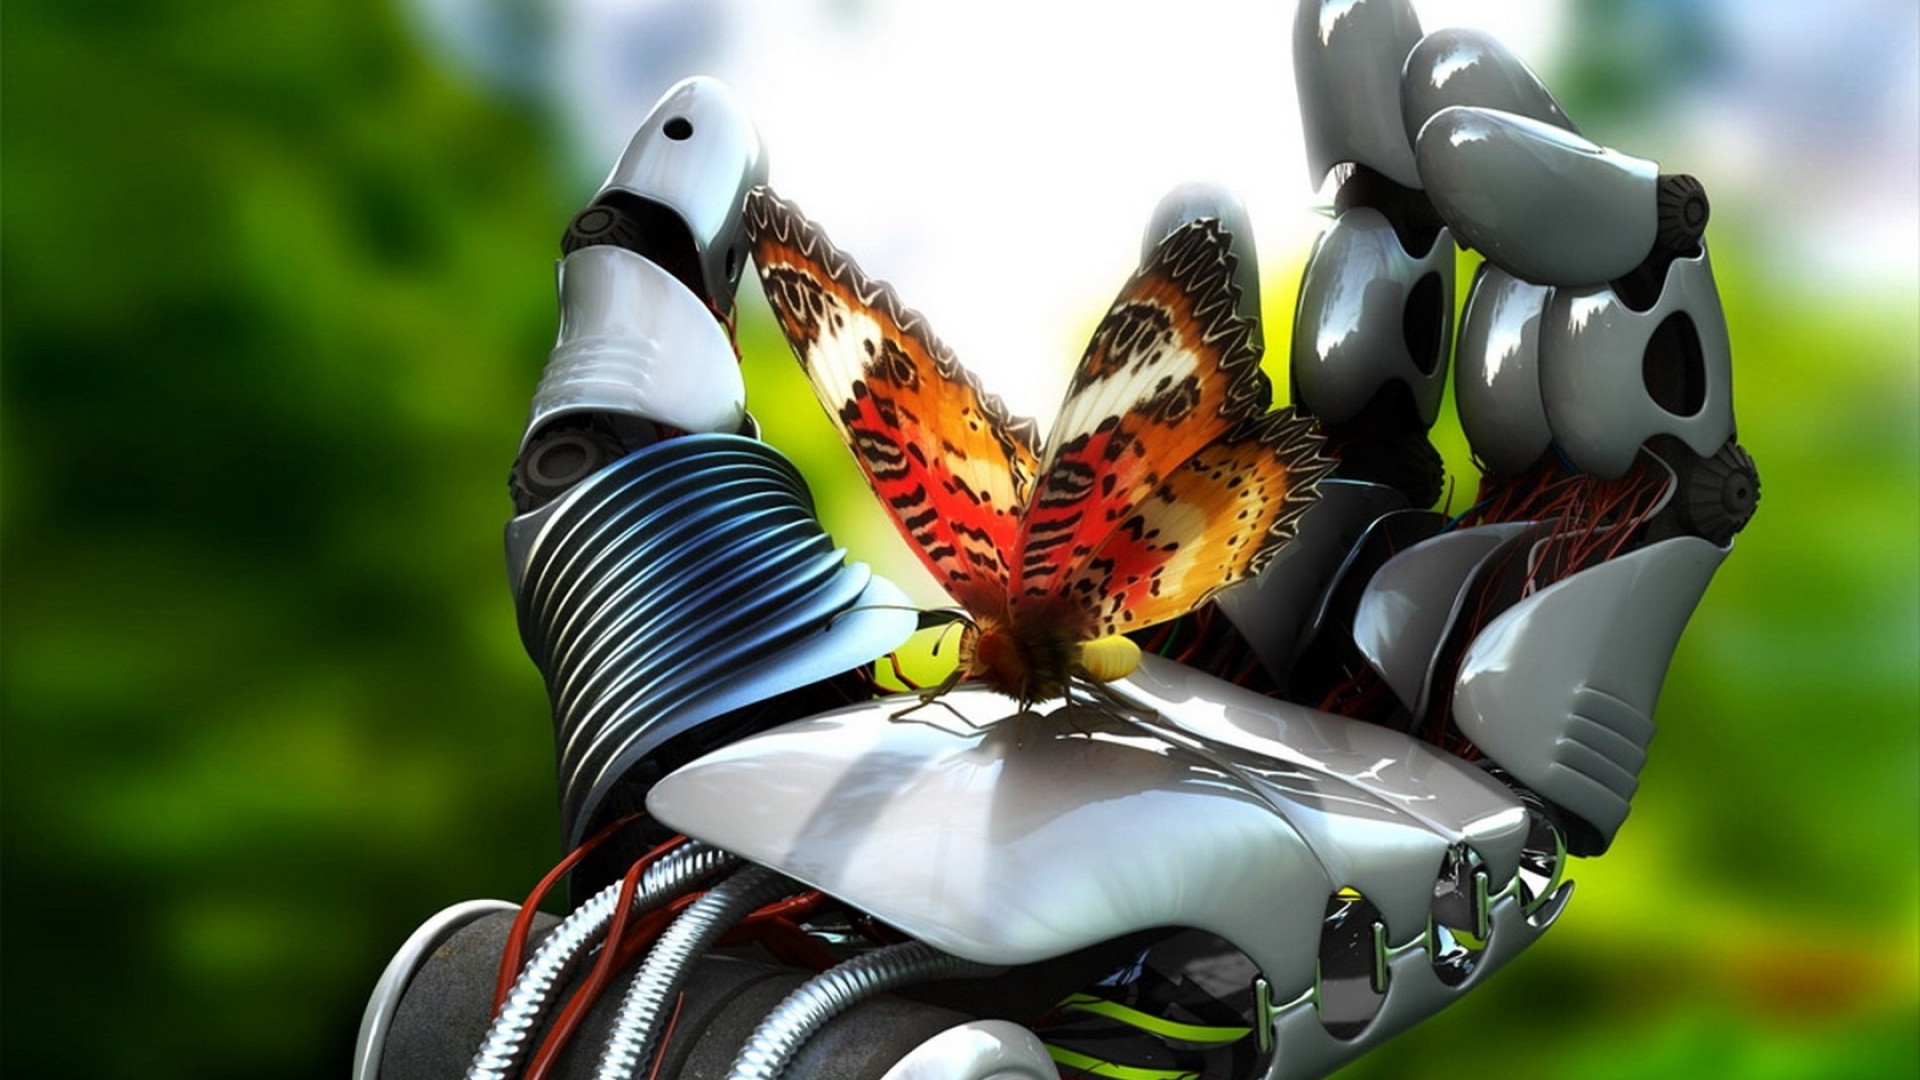 hd Wallpaper in high resolution for free Get Robot Hand Butterfly hd